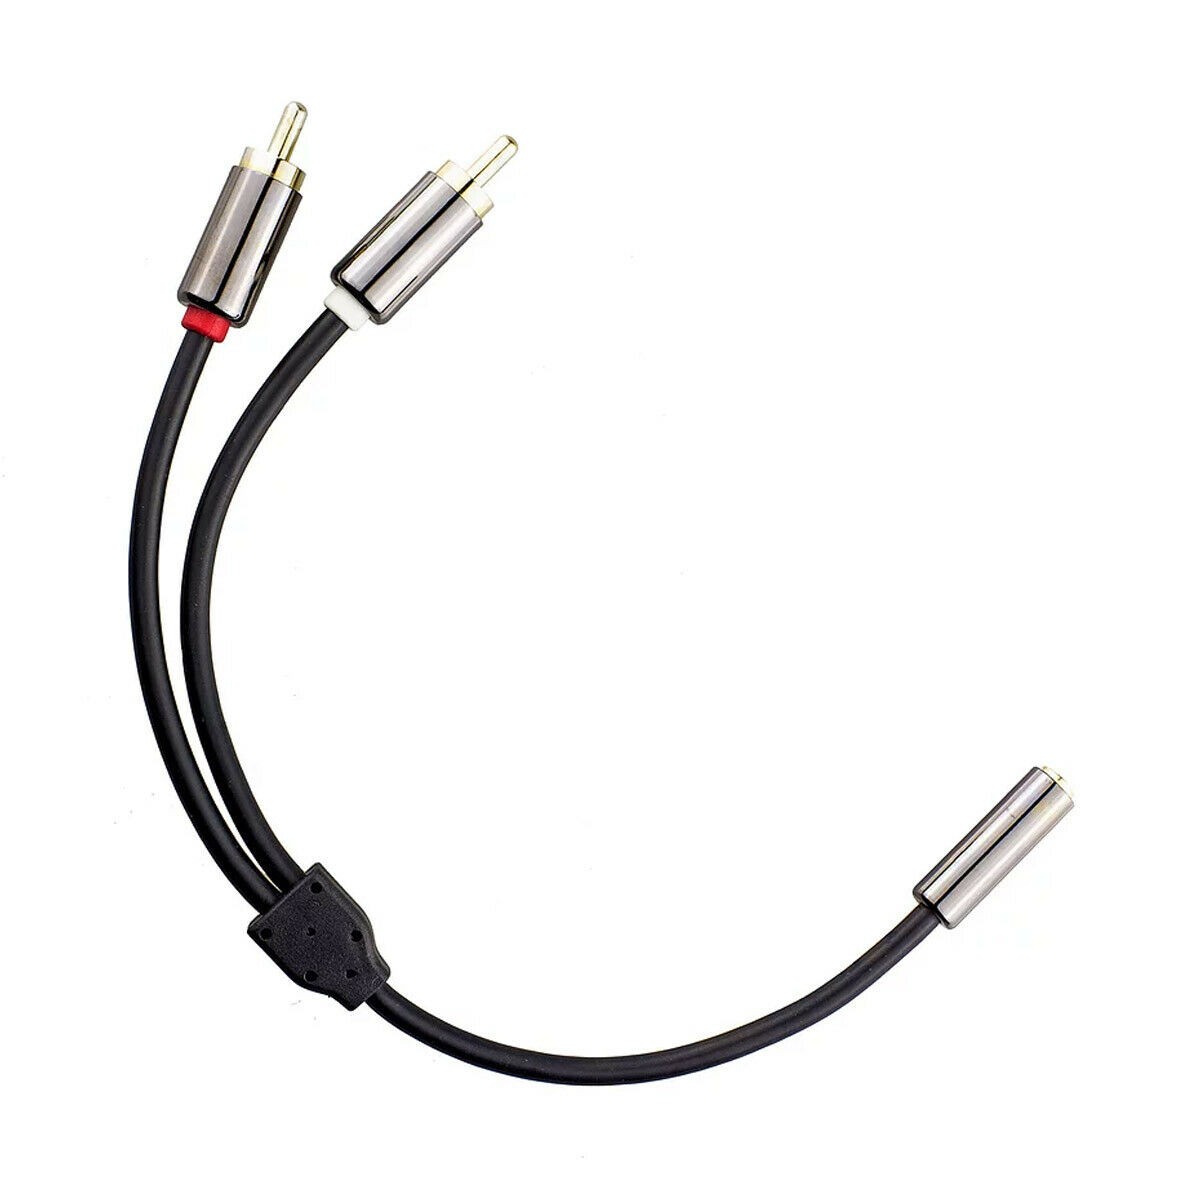 [GRADE S] KHADAS Adapter Cable Male Stereo RCA to Female Stereo Jack 3.5mm 20cm